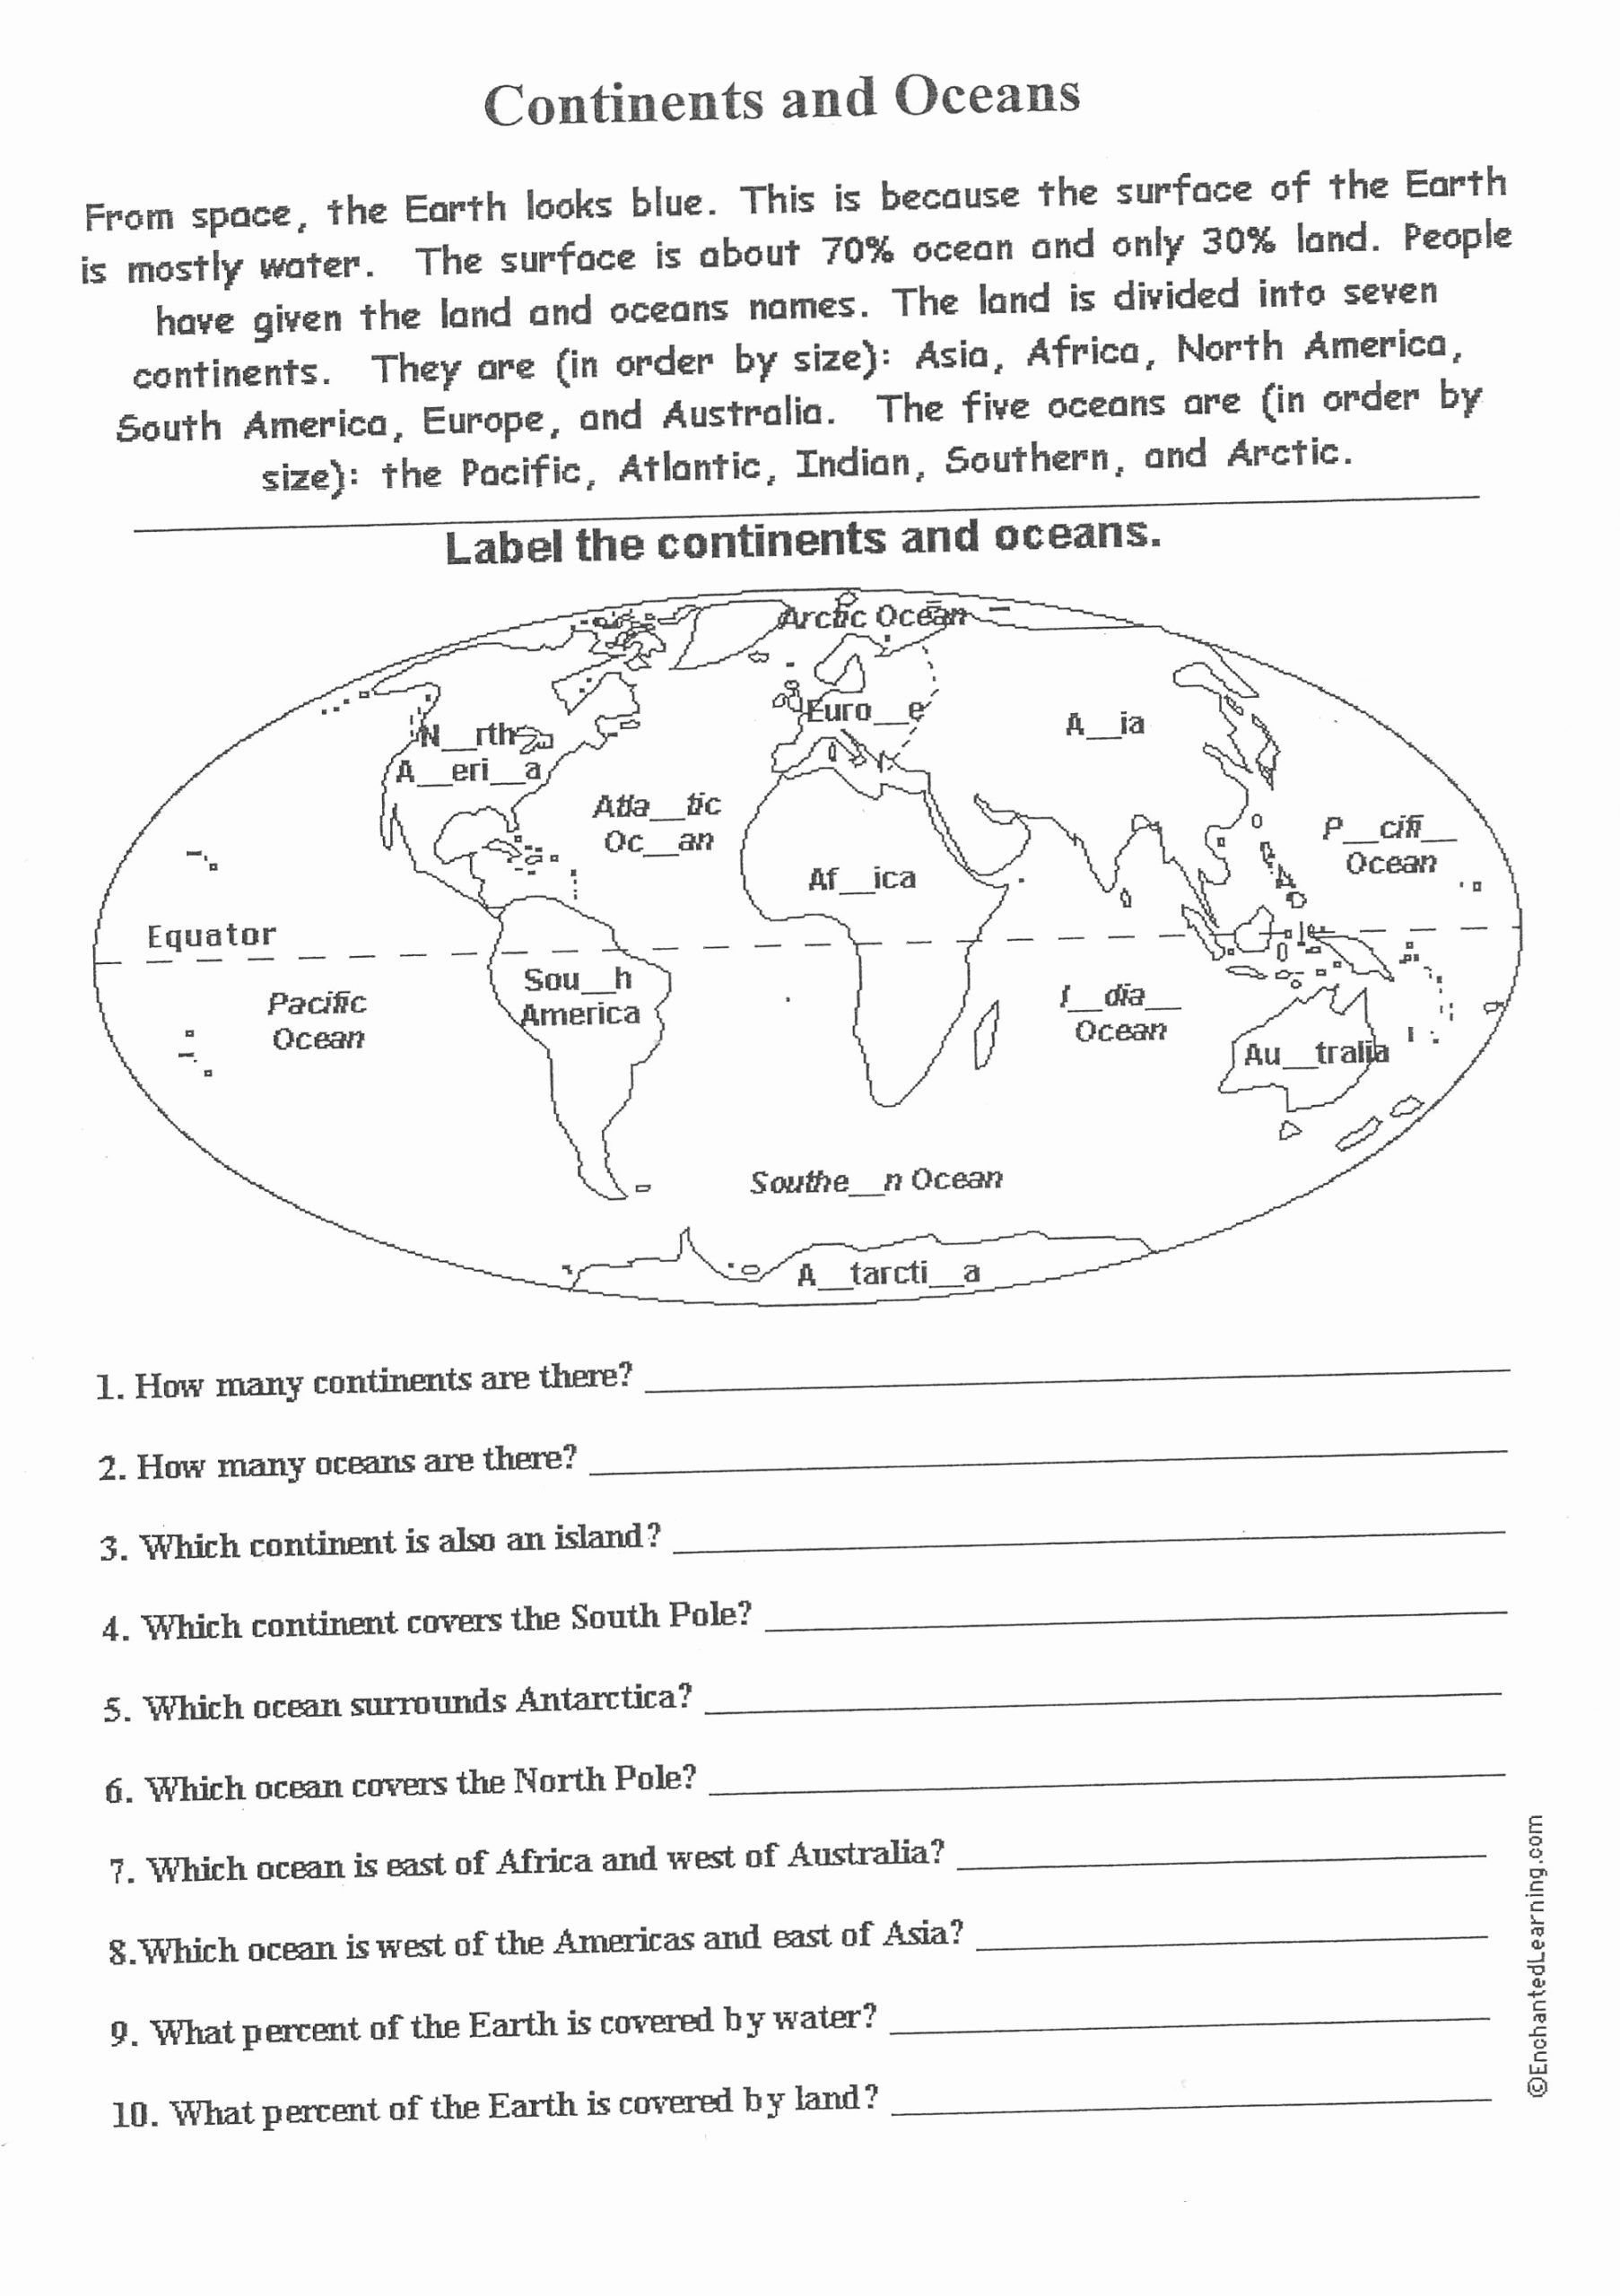 Continents and Oceans Worksheet Printable Lovely Label the the Continents and Color them Great Worksheet